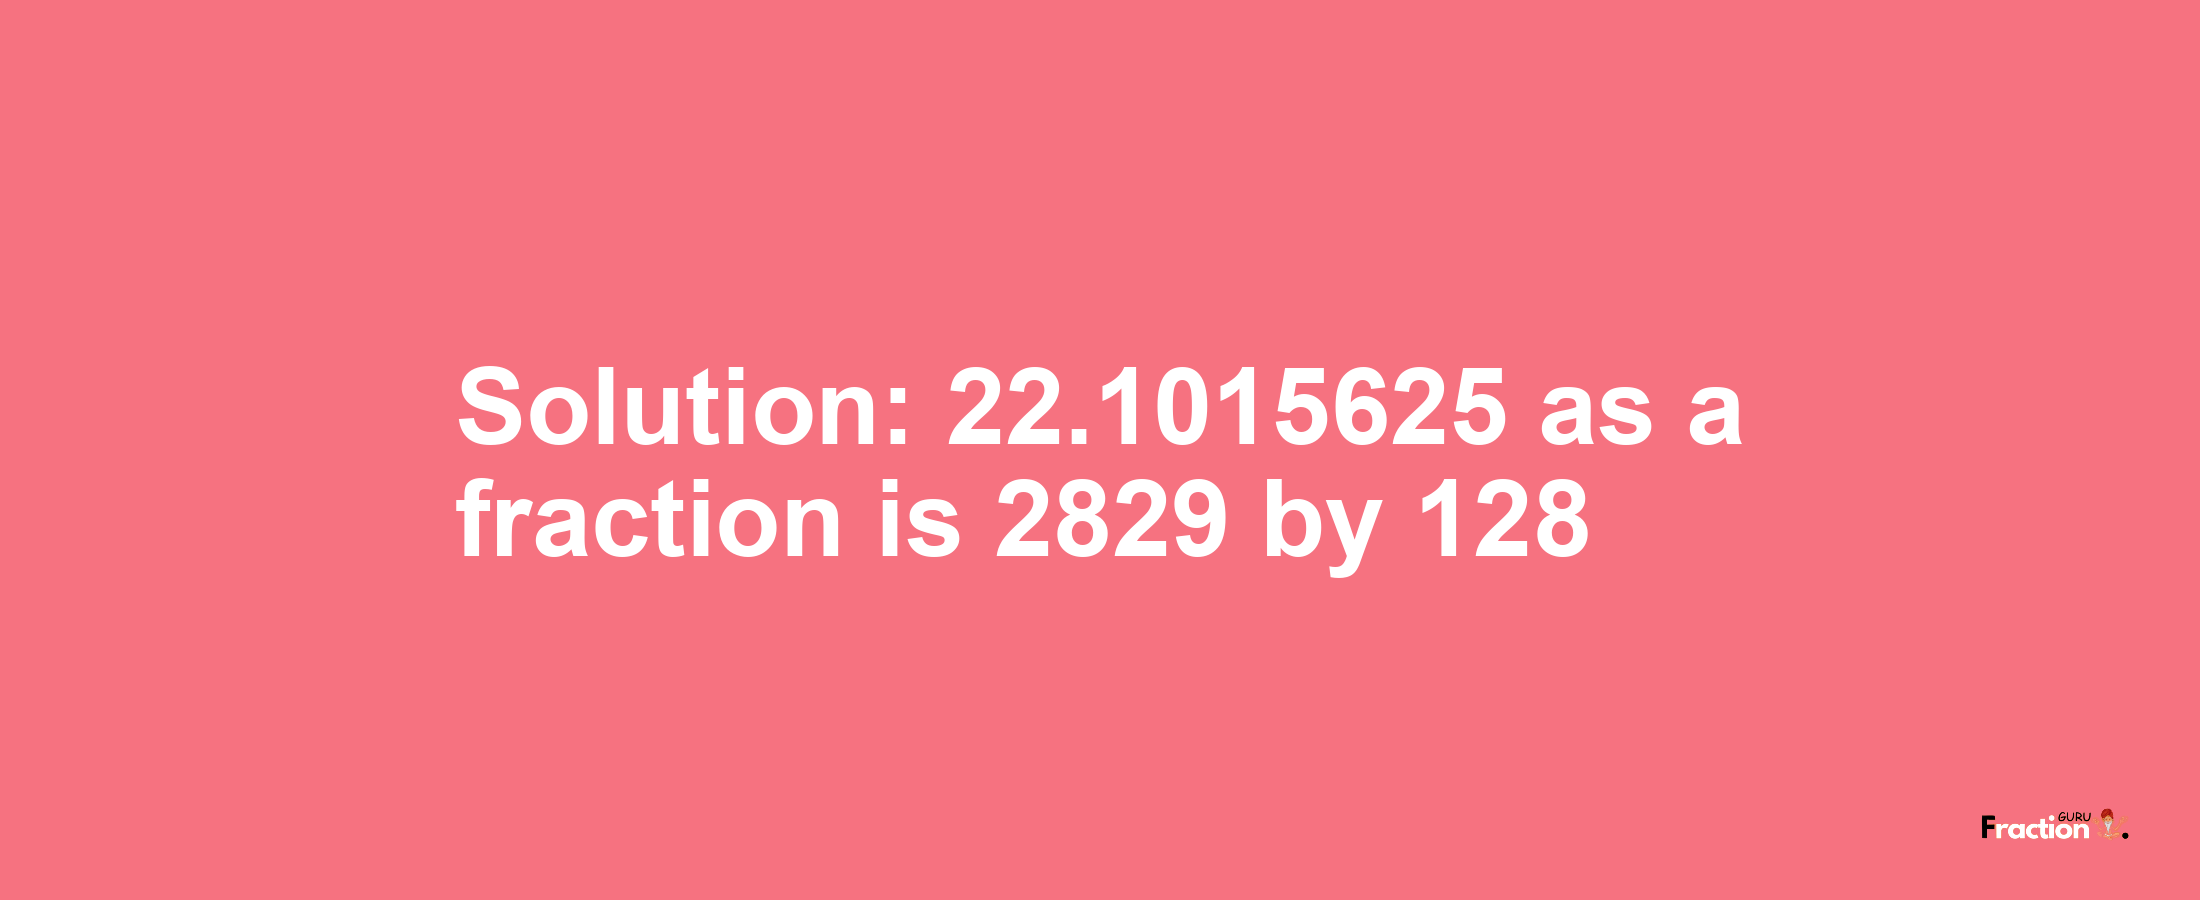 Solution:22.1015625 as a fraction is 2829/128